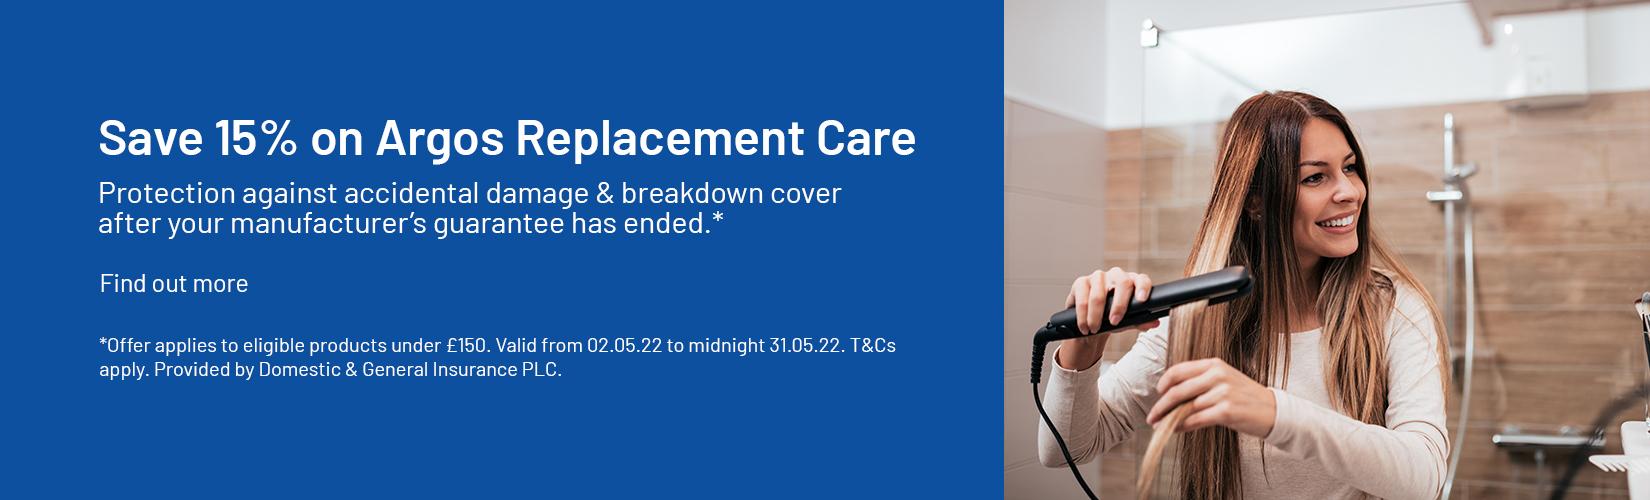 Save 15% on Argos Replacement Care.